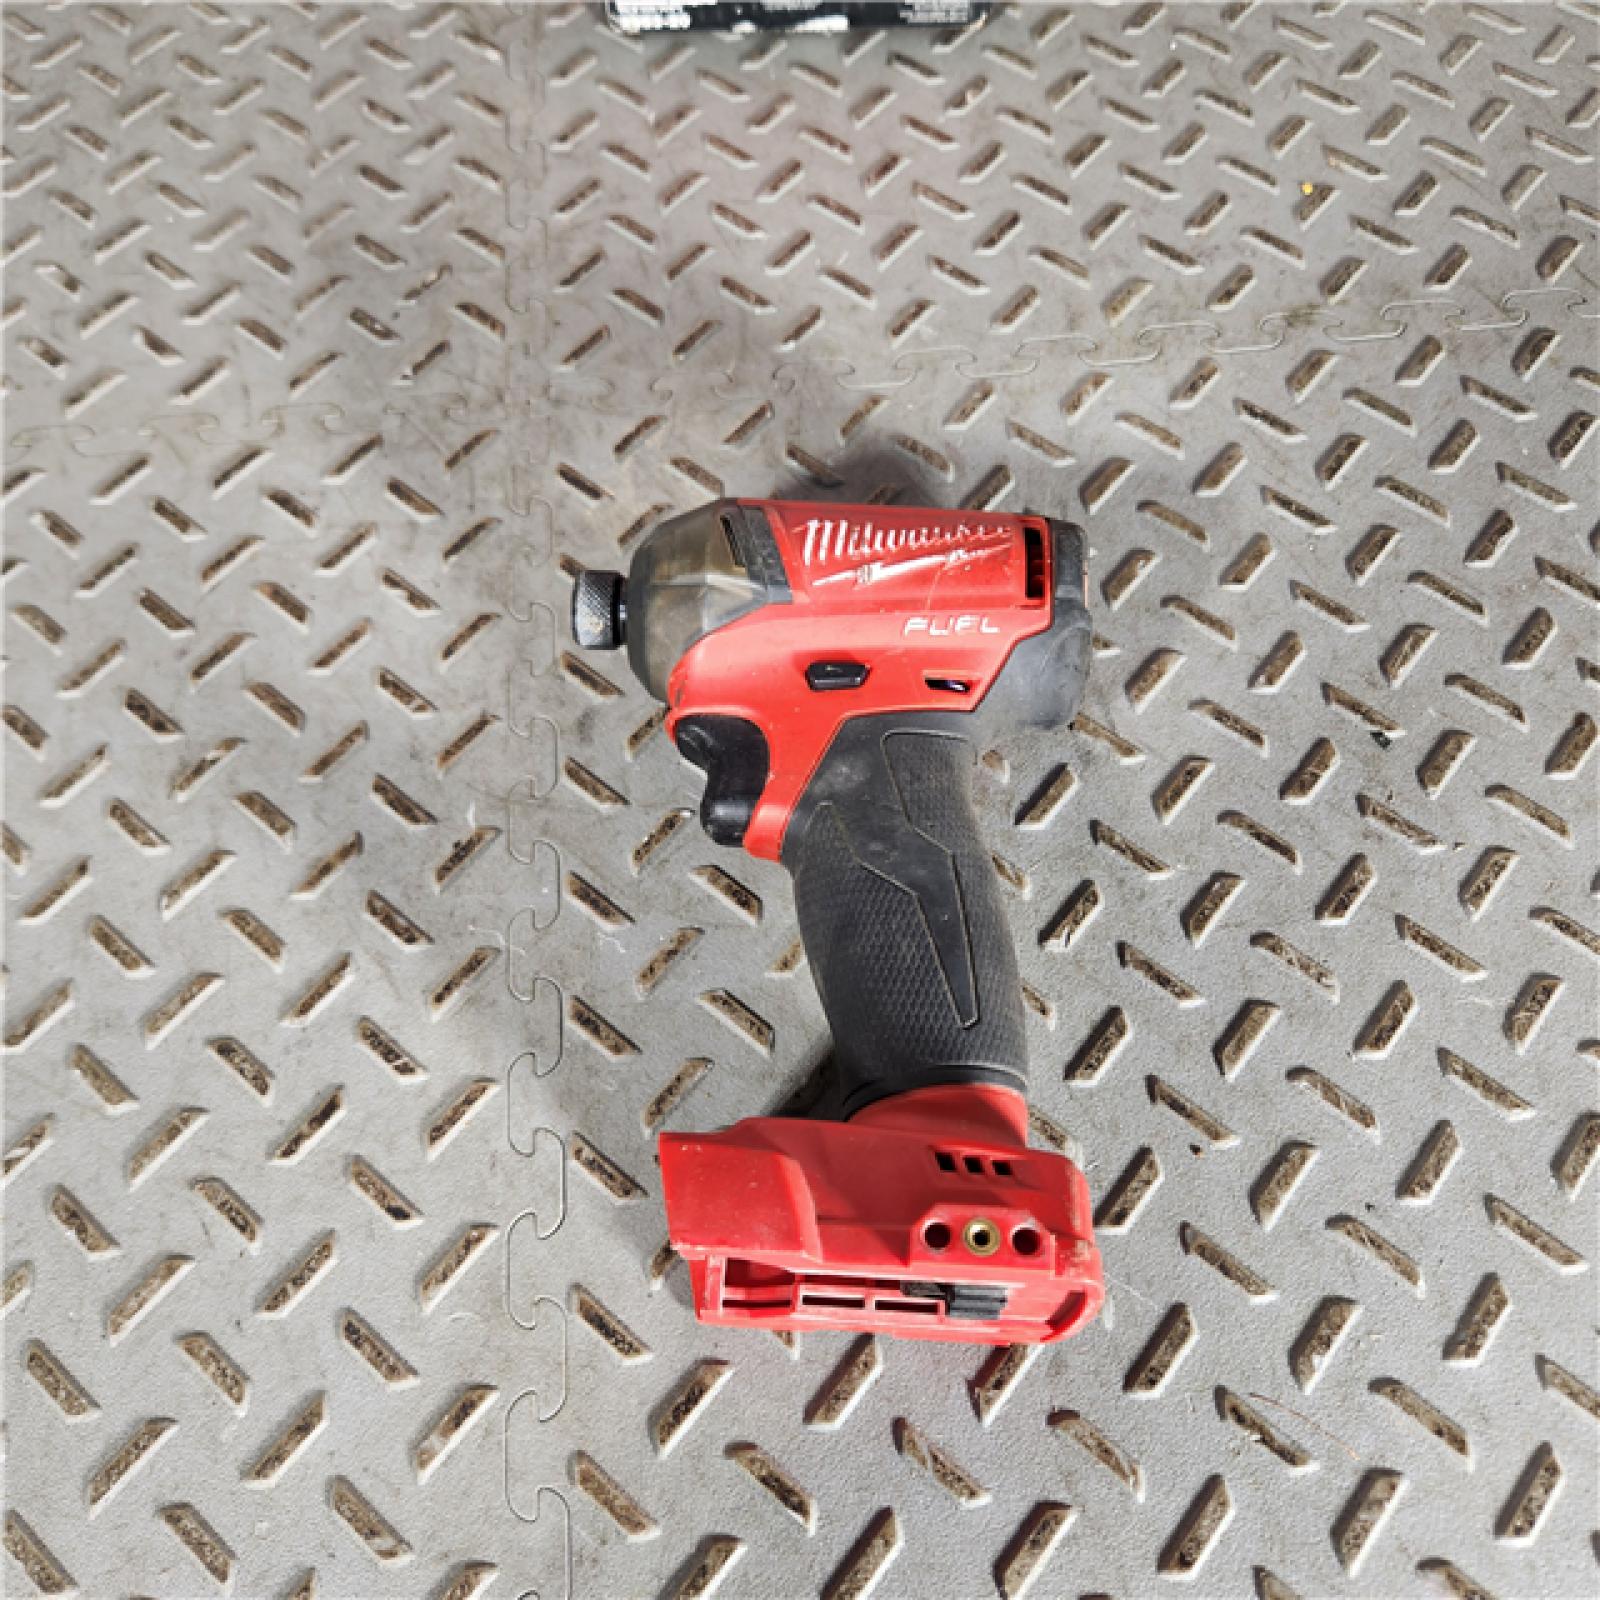 Houston location AS-IS 495-2953-20 M18 Fuel 0.25 in. Hex Impact Driver TOOL ONLY